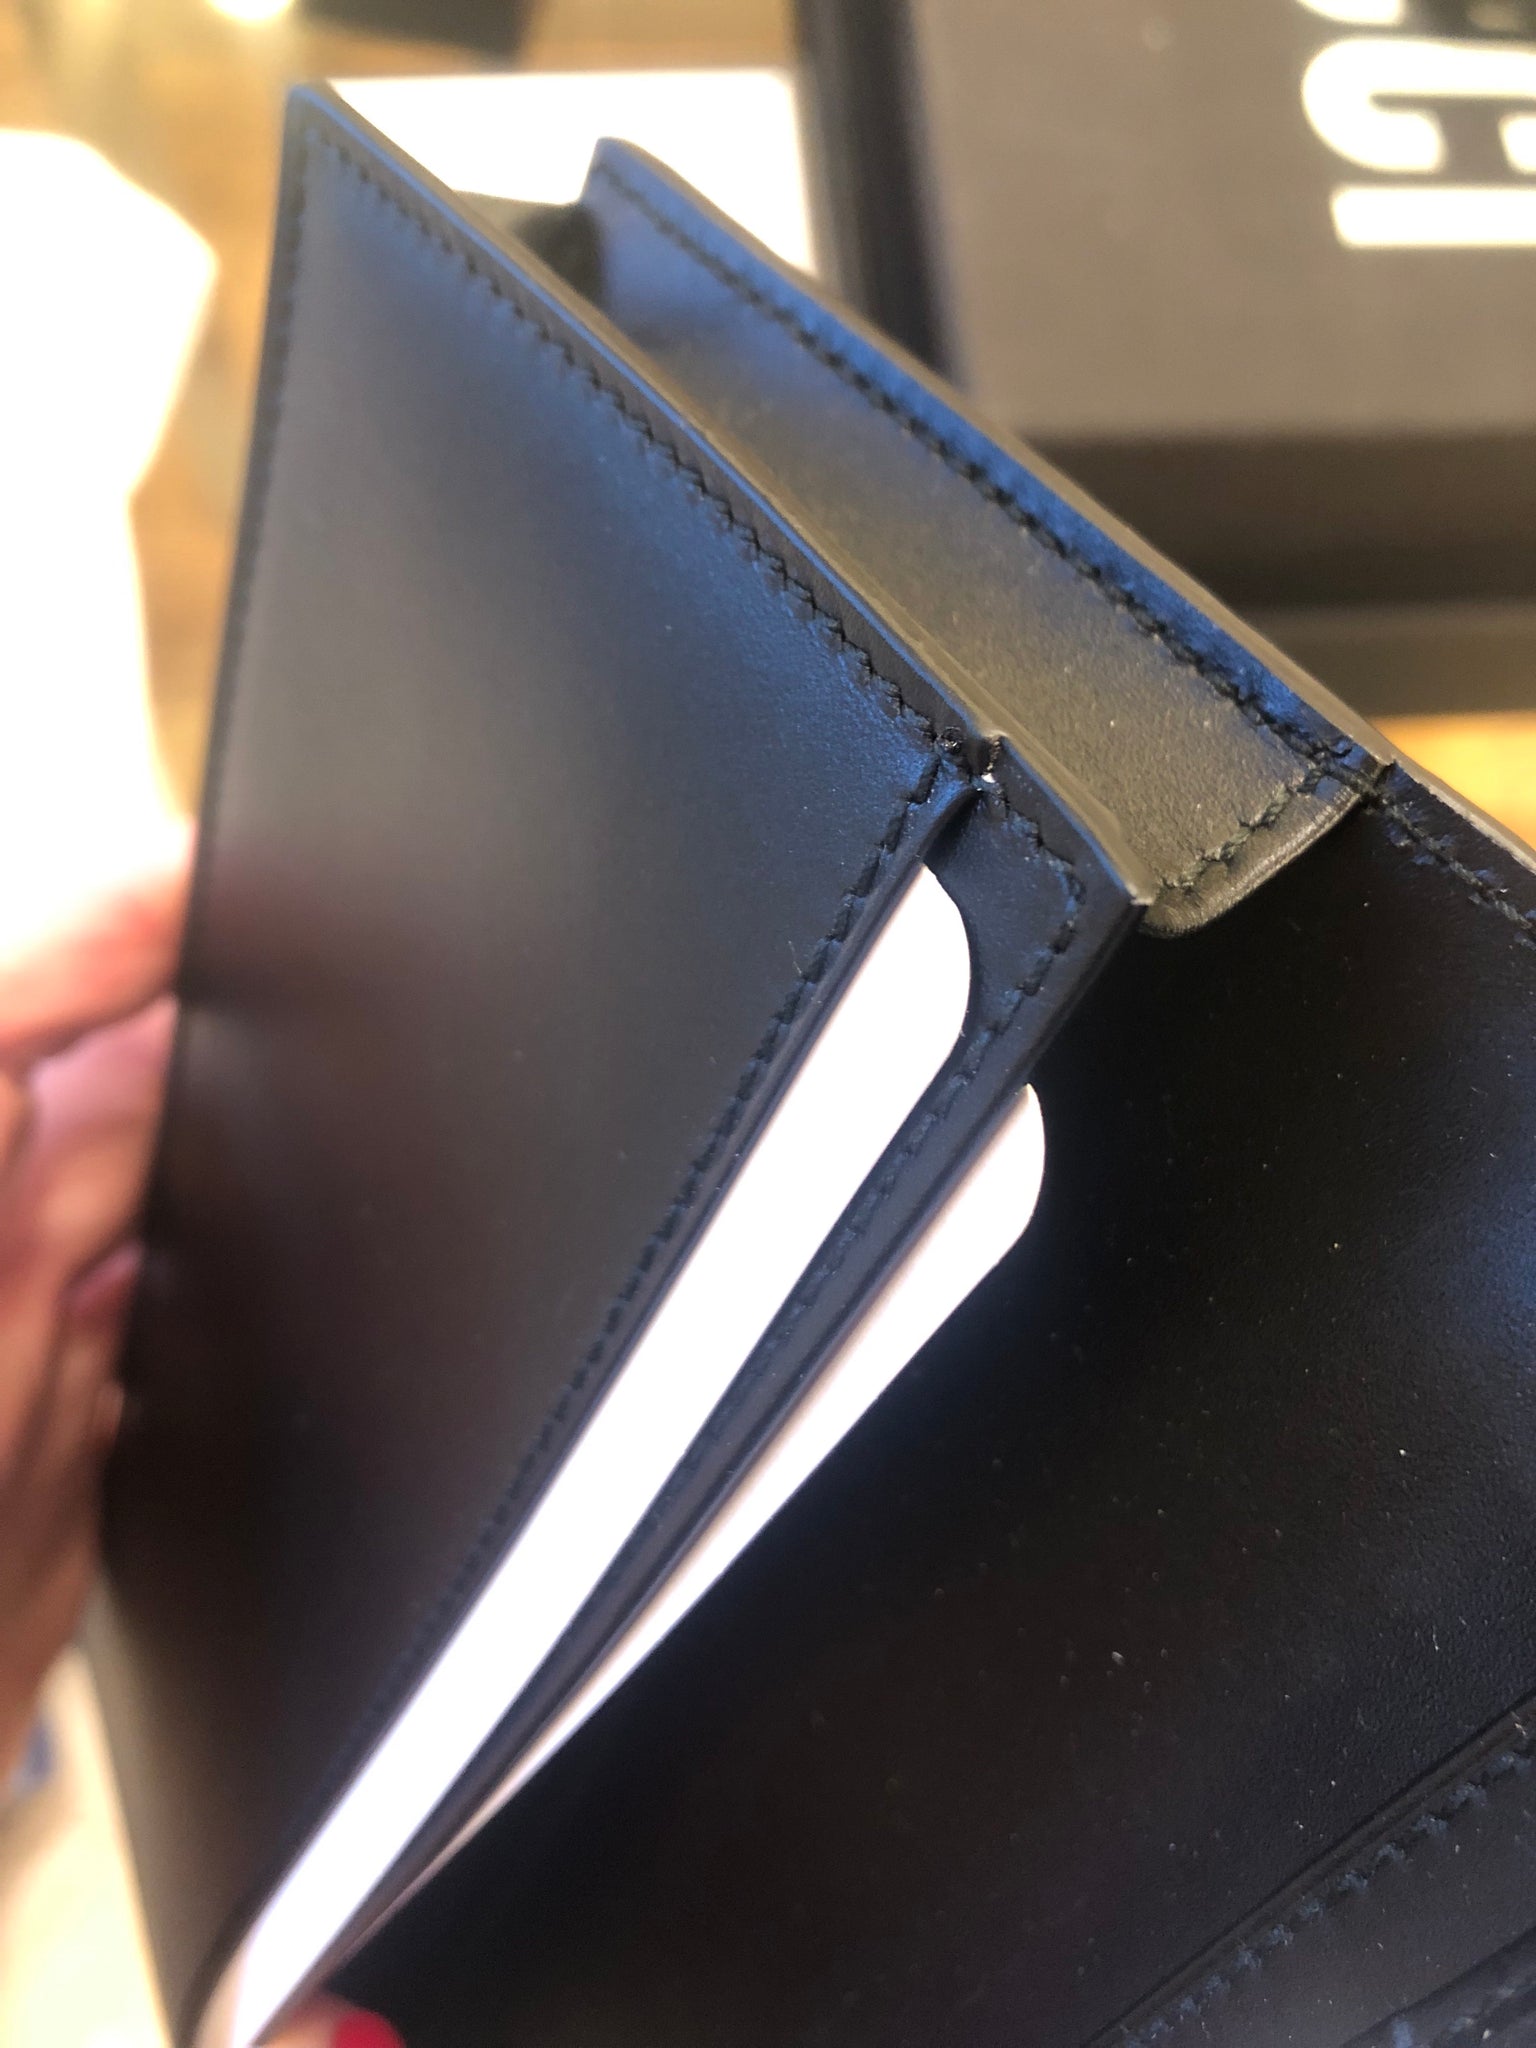 Authentic Gucci Black Guccissima Leather Long Wallet